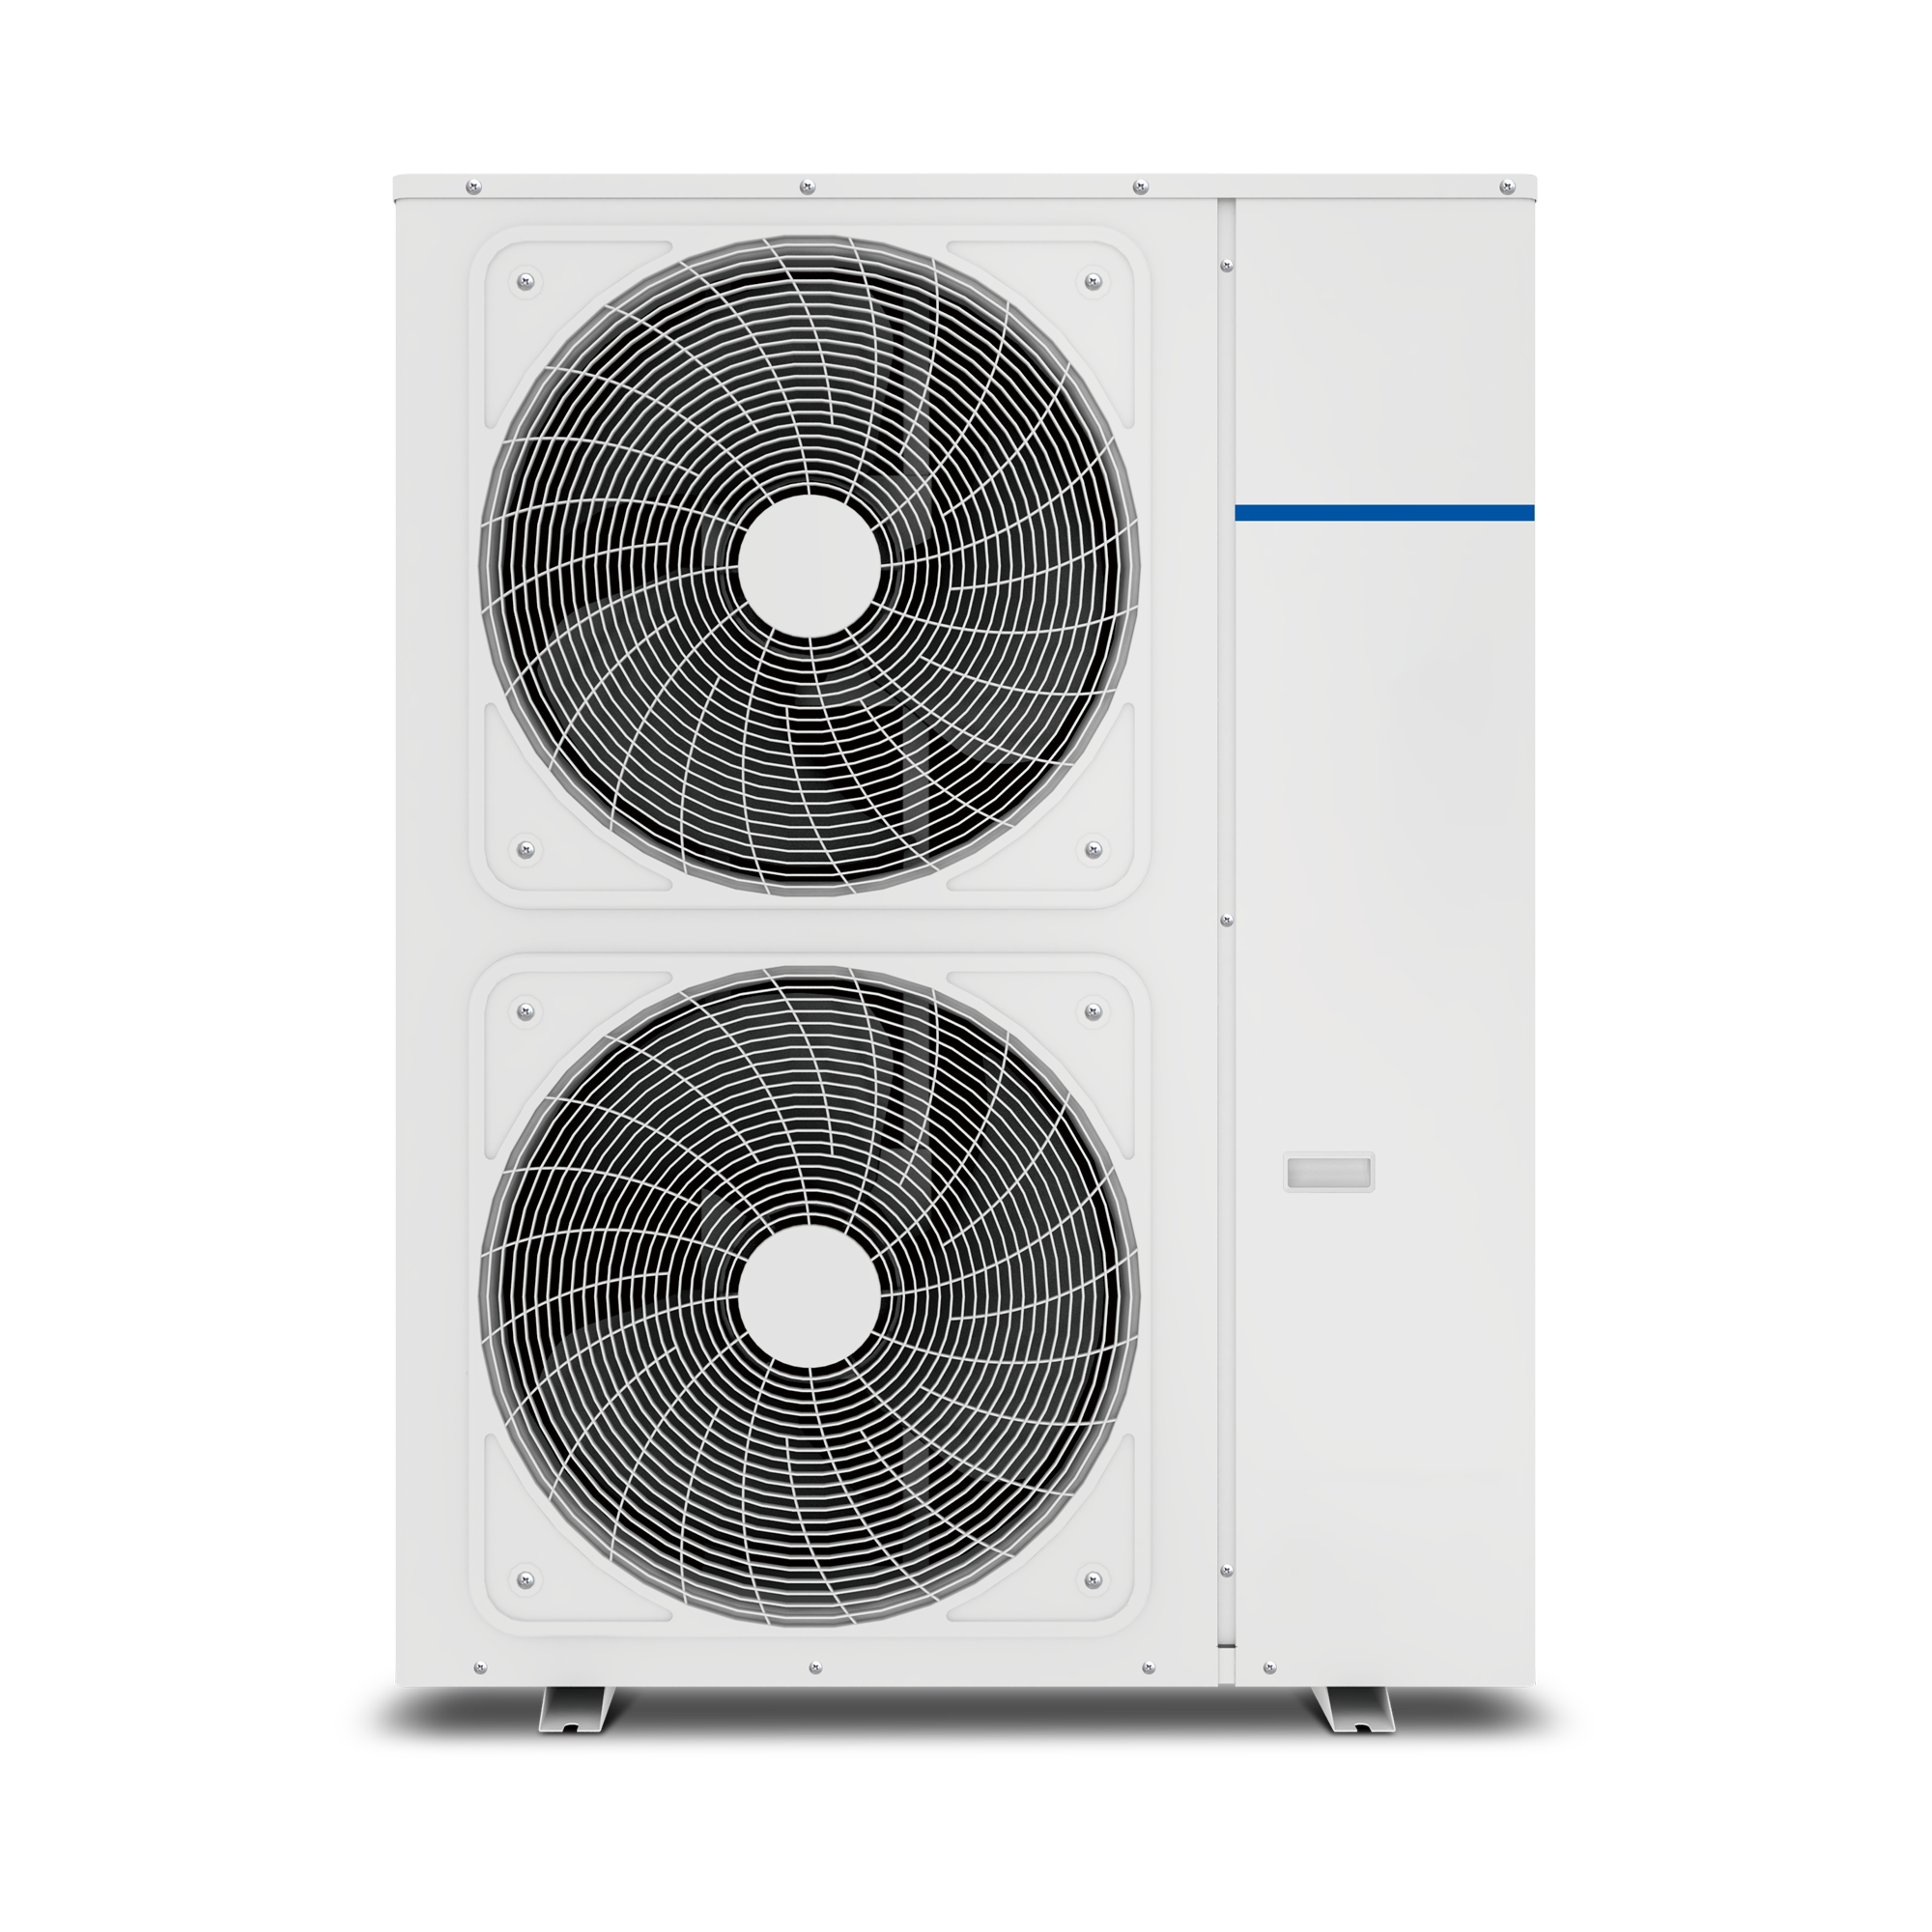 Wifi Monoblock High Power Heating And Cooling Heat Pump